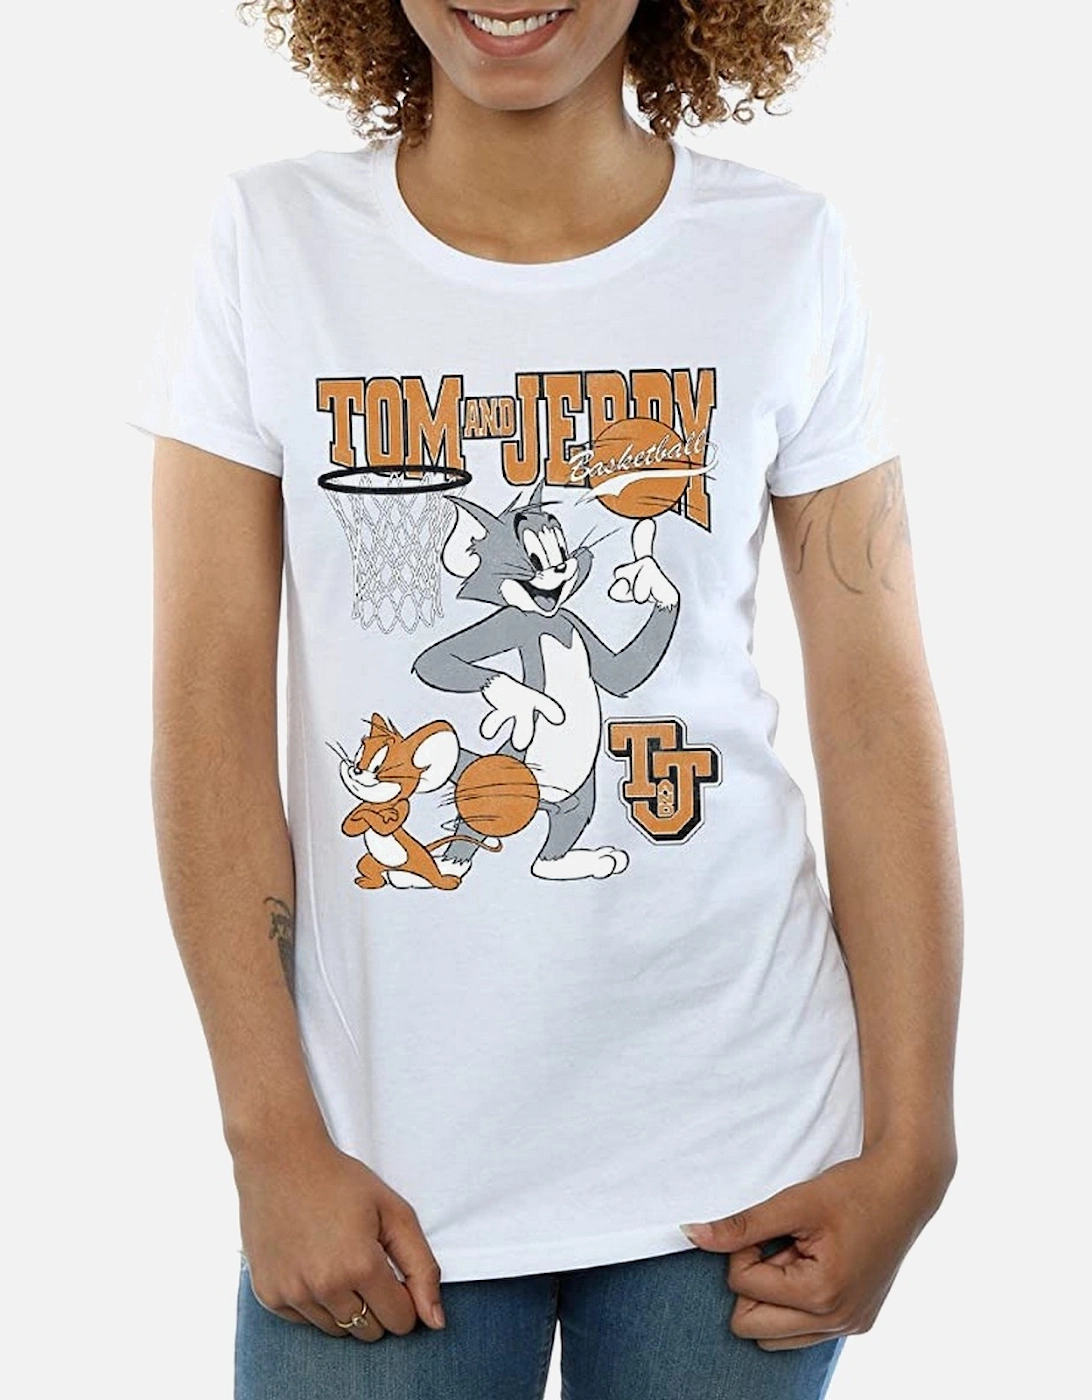 Tom and Jerry Womens/Ladies Spinning Basketball Cotton Boyfriend T-Shirt, 6 of 5